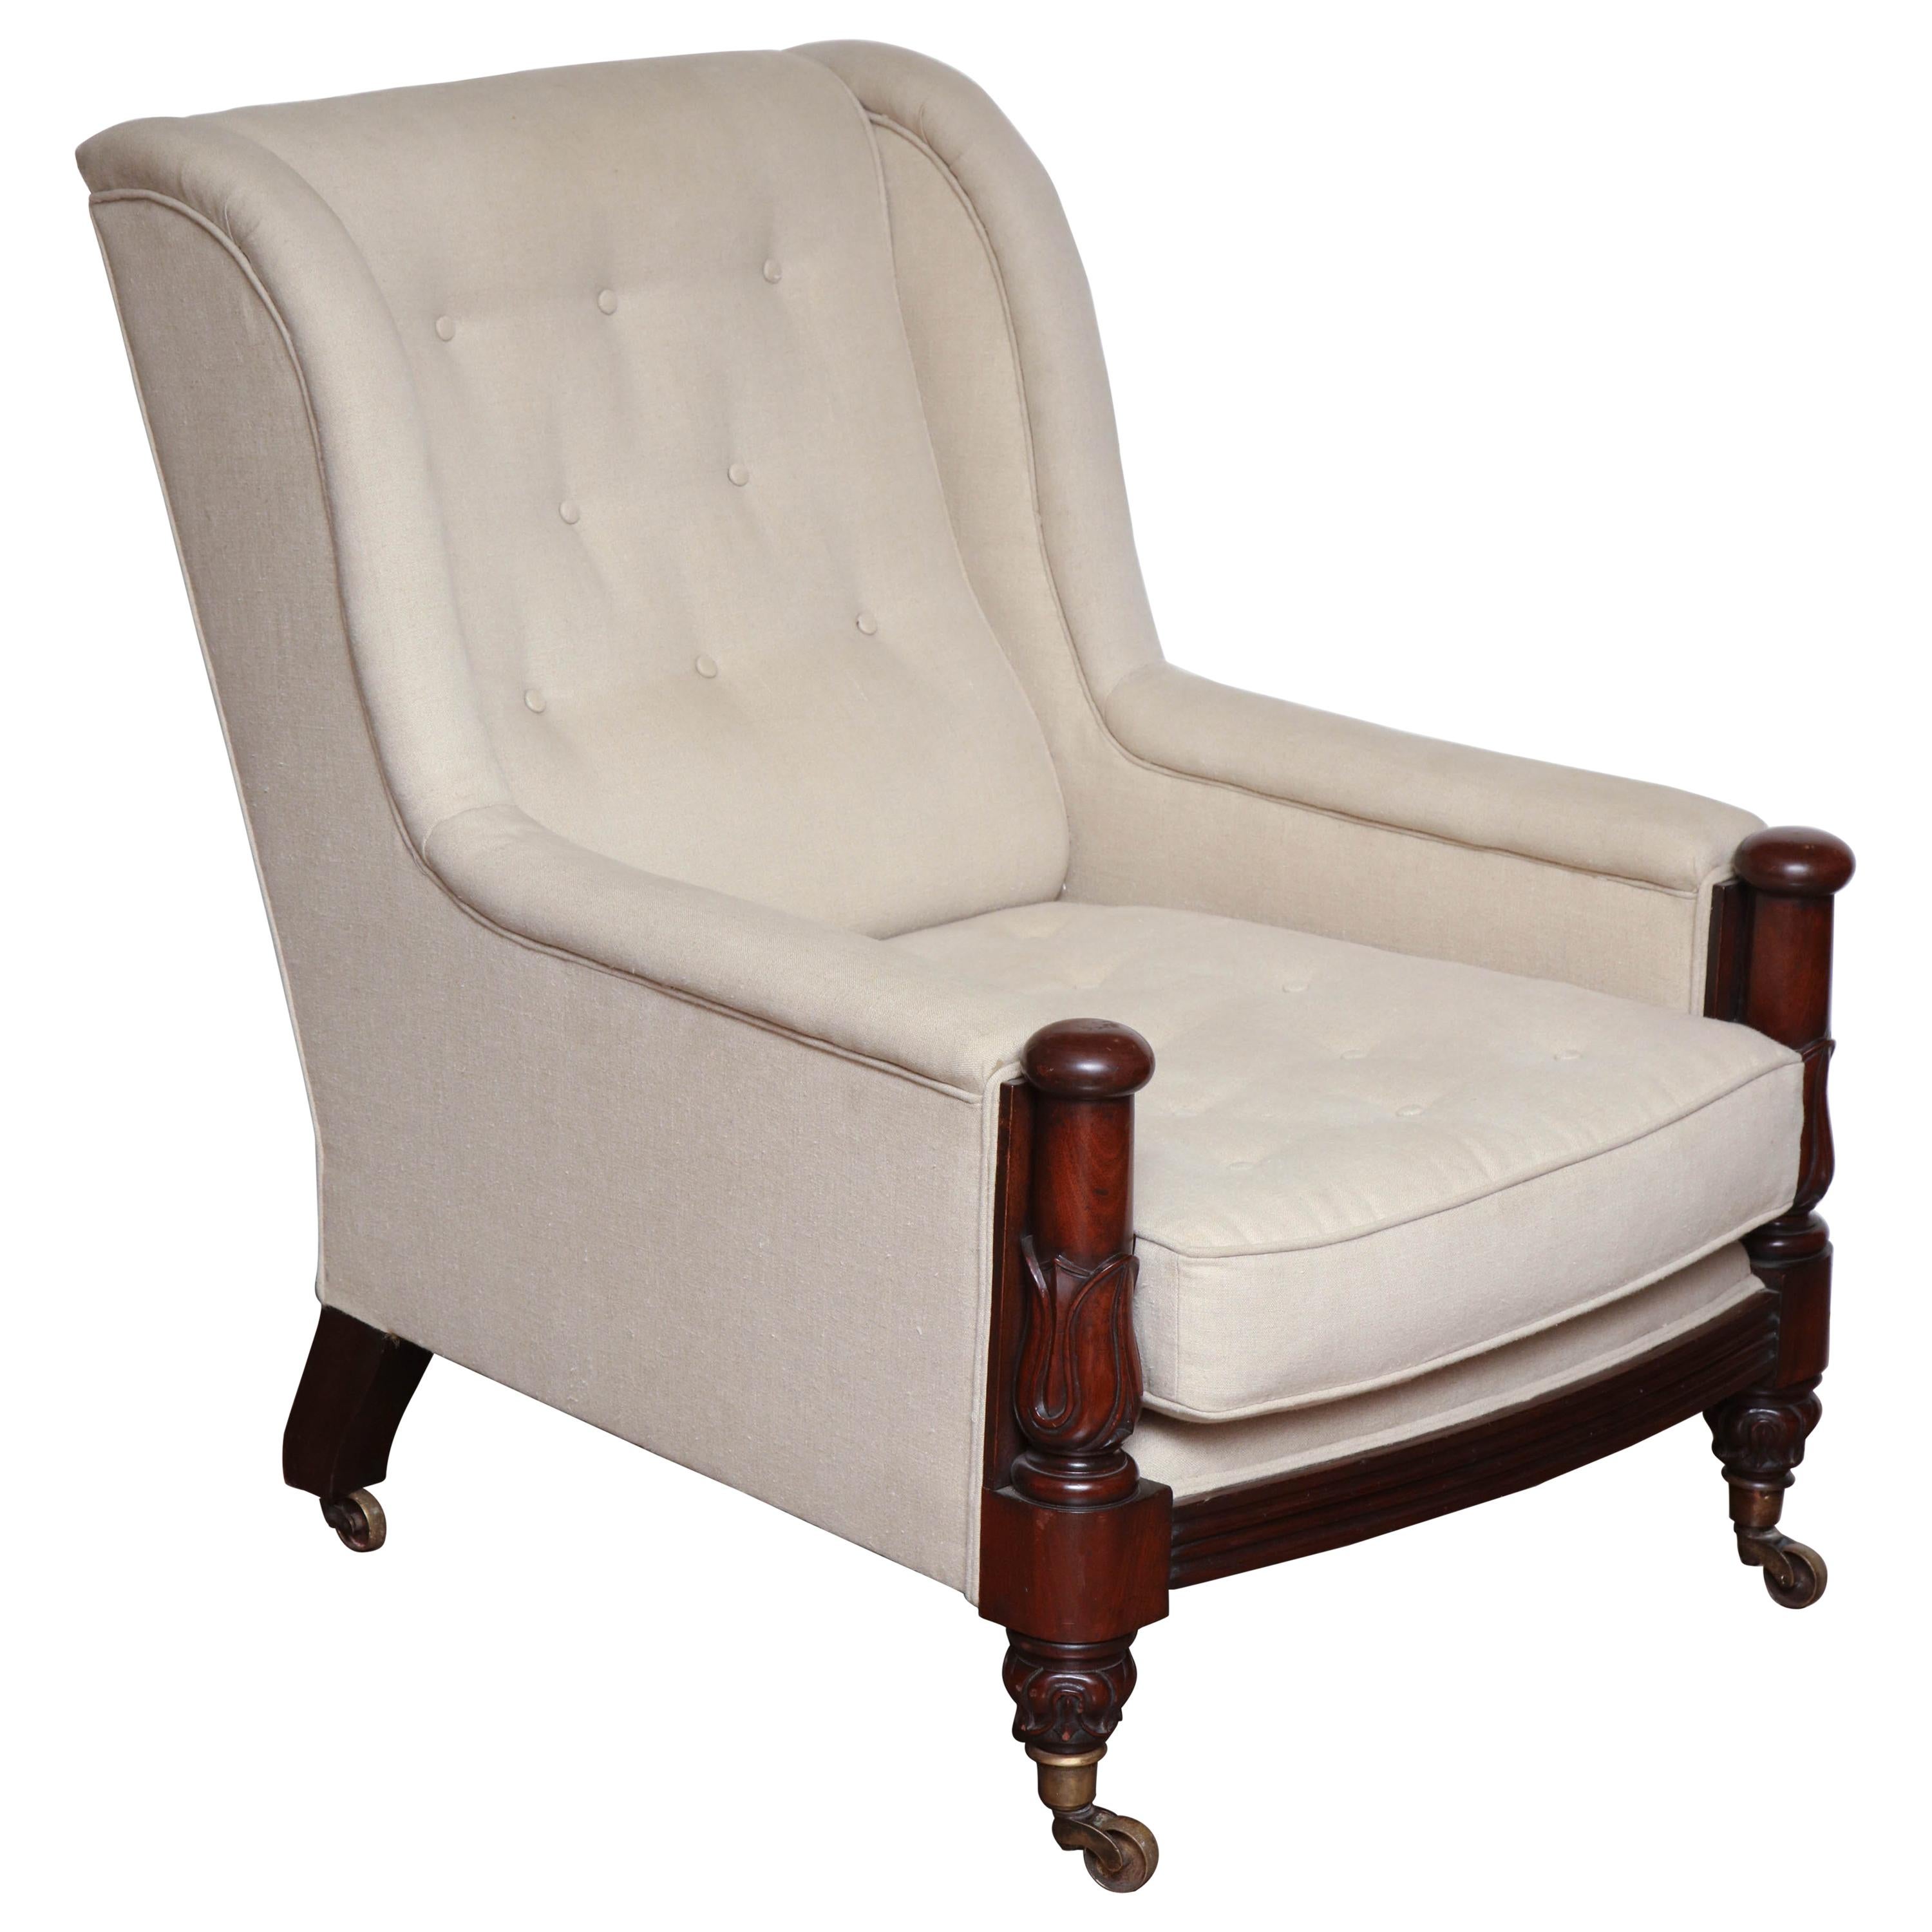 One 19th Century Mahogany Mounted Library Armchair